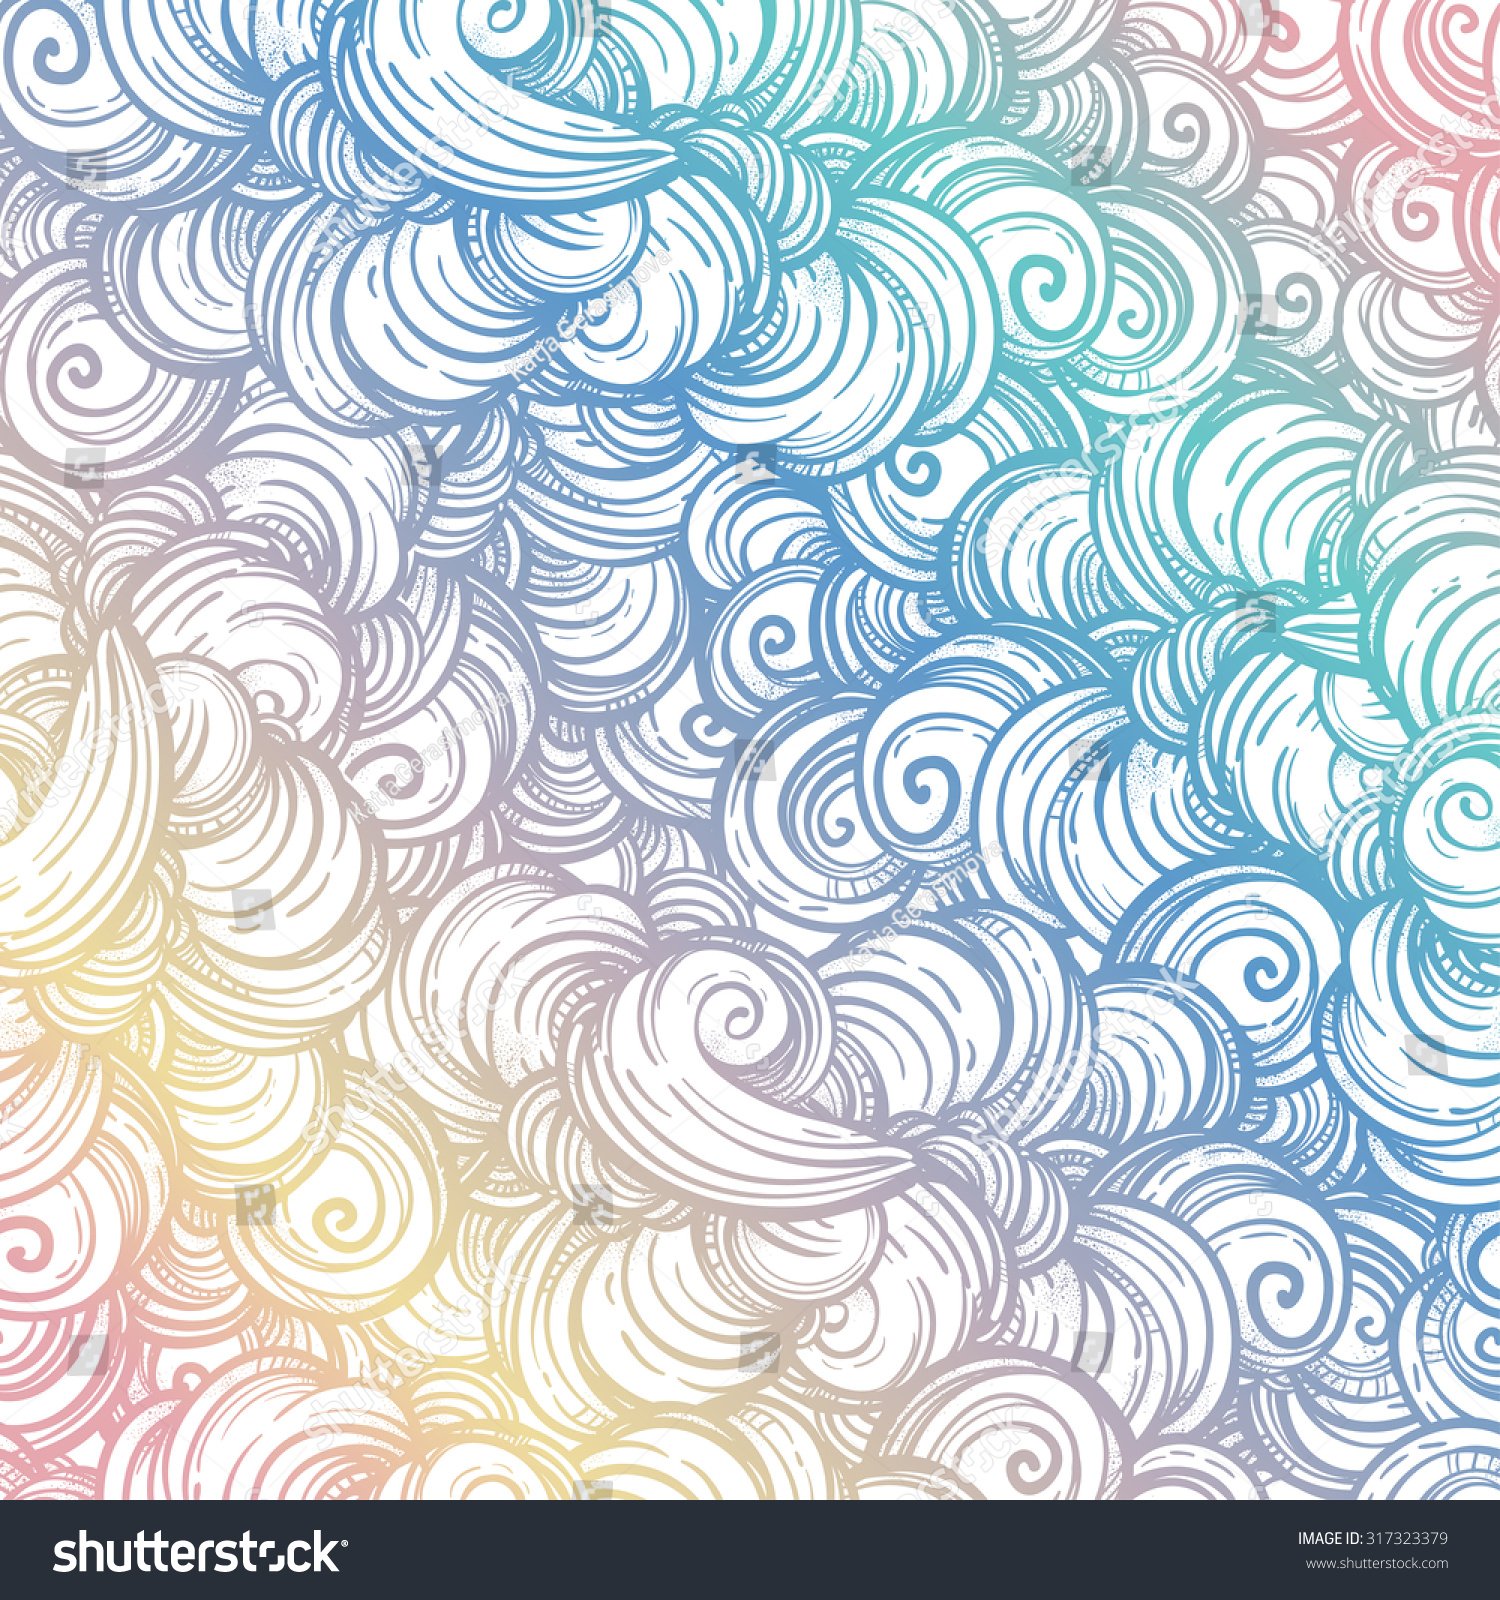 Cute Abstract Vector Background Wallpaper